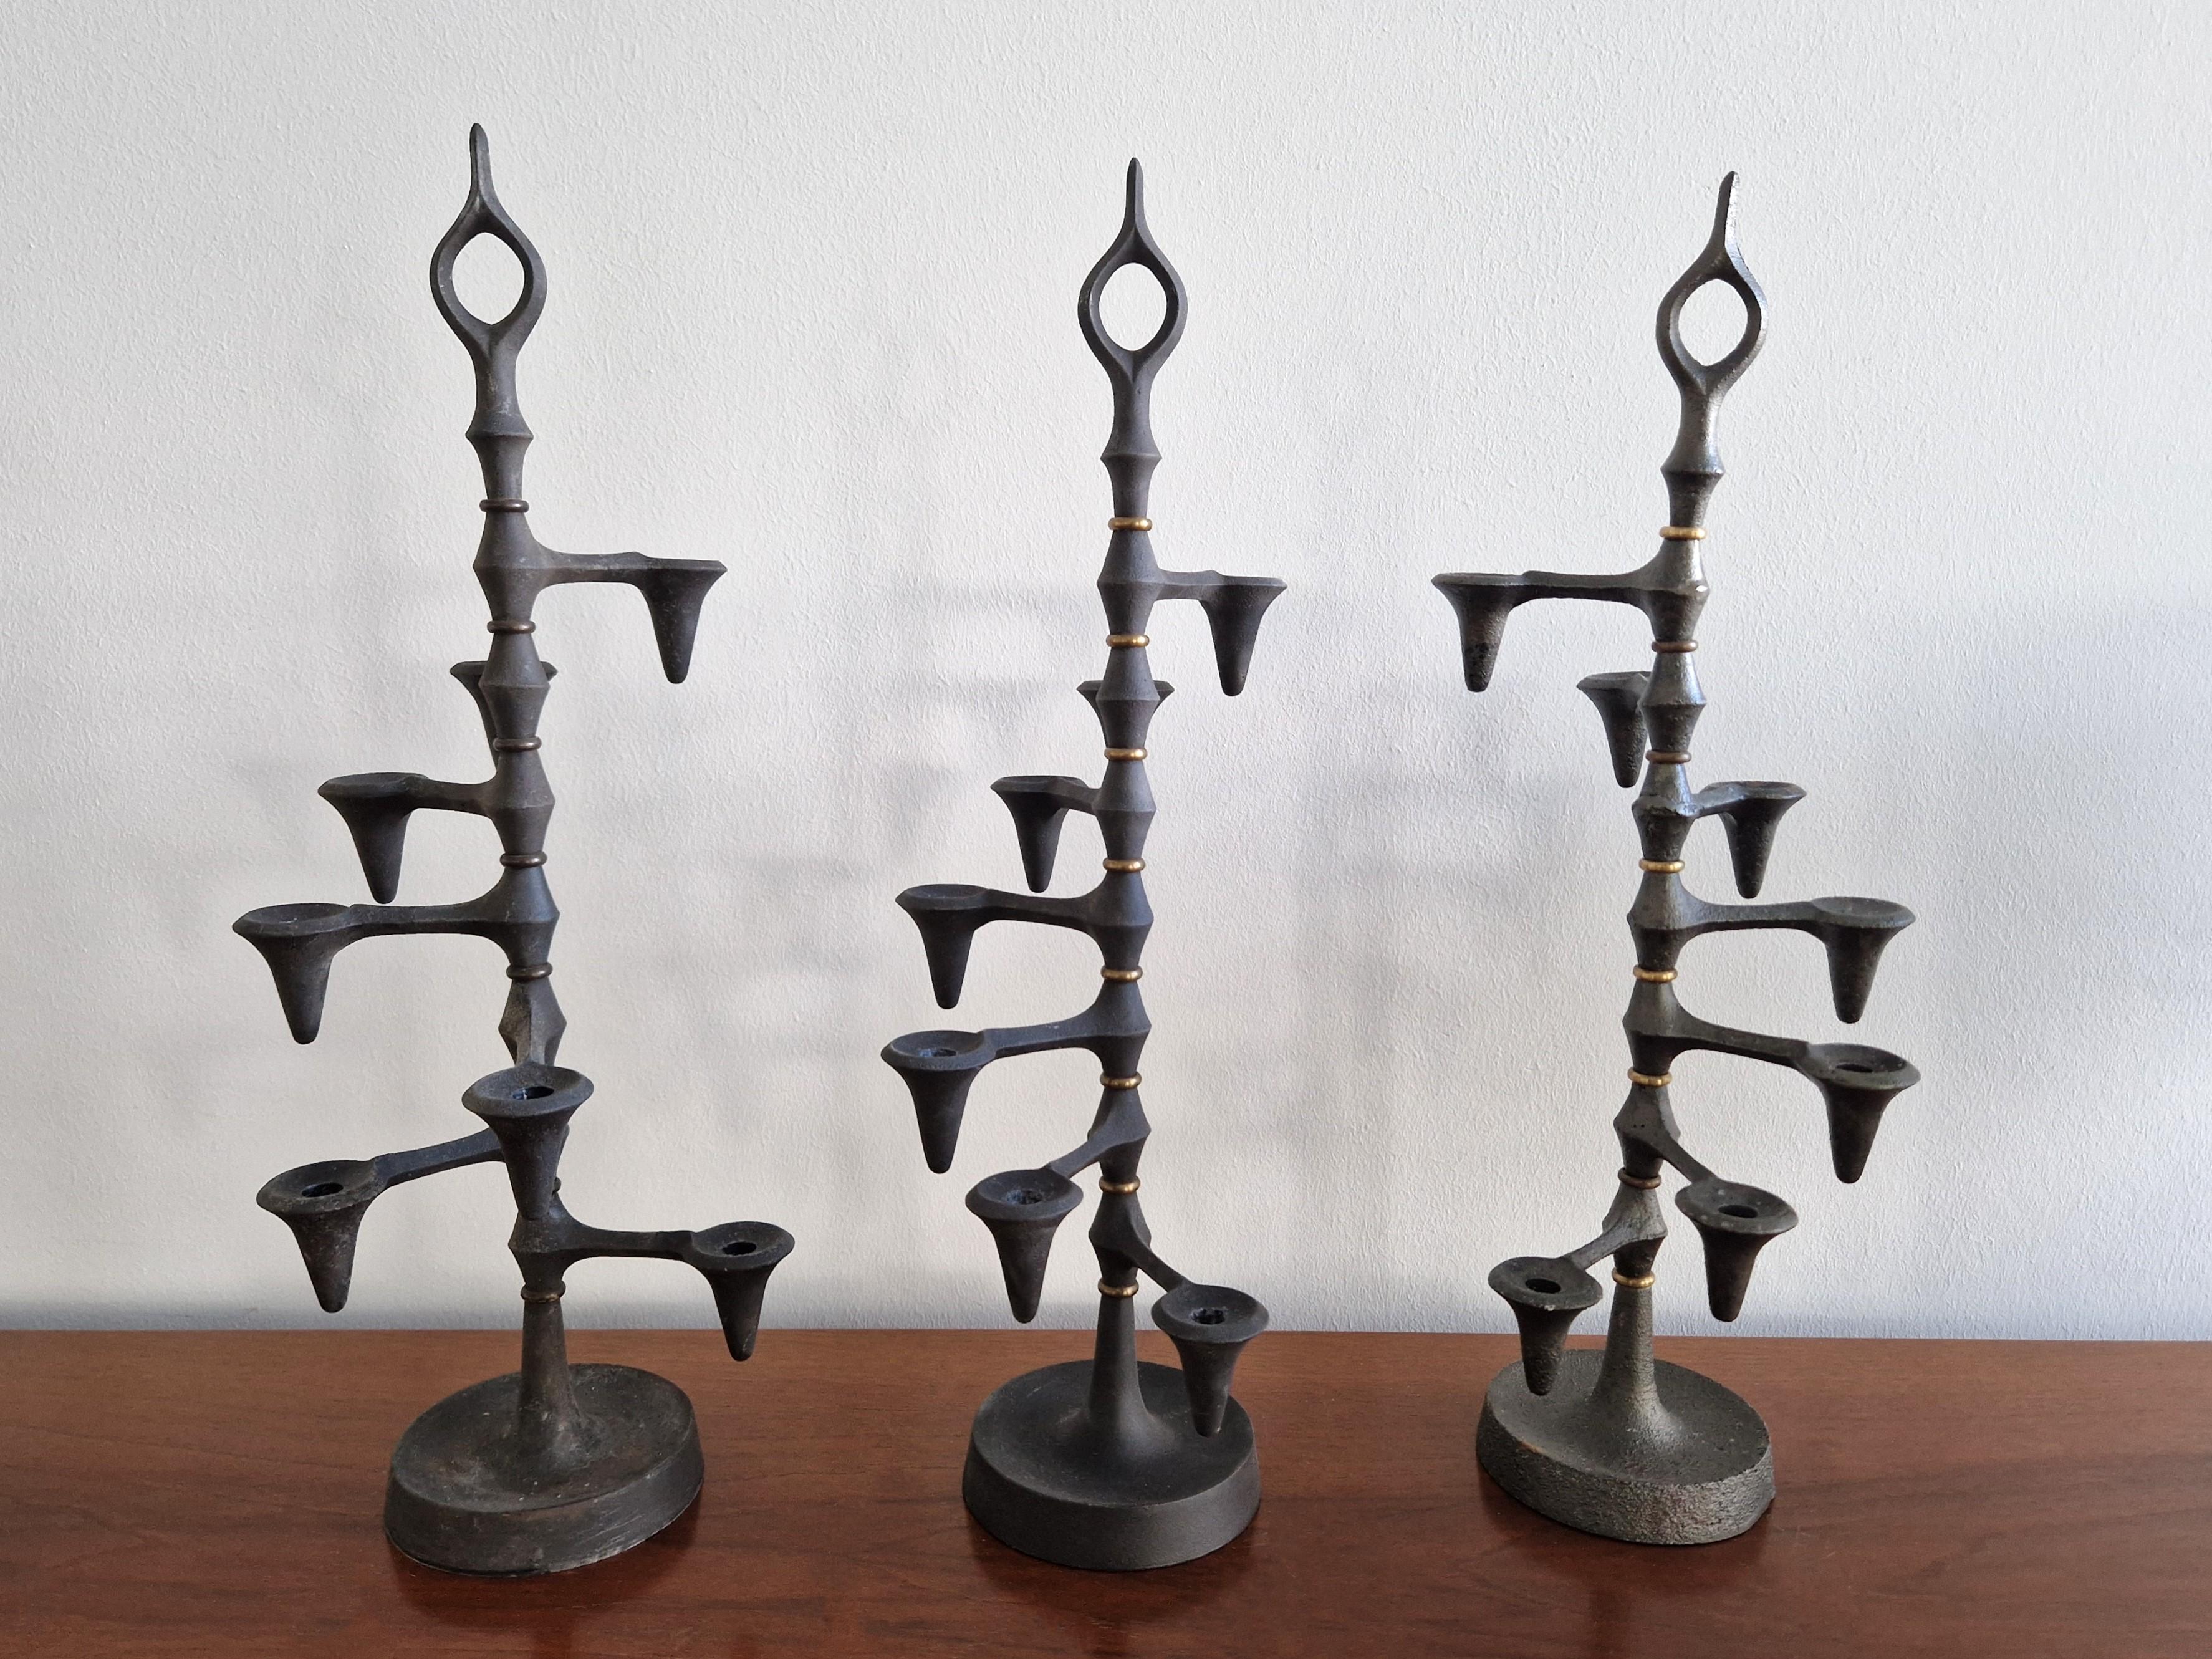 Mid-20th Century Brutalist cast iron and brass candelabra by Jens Quistgaard, Denmark 1960's For Sale